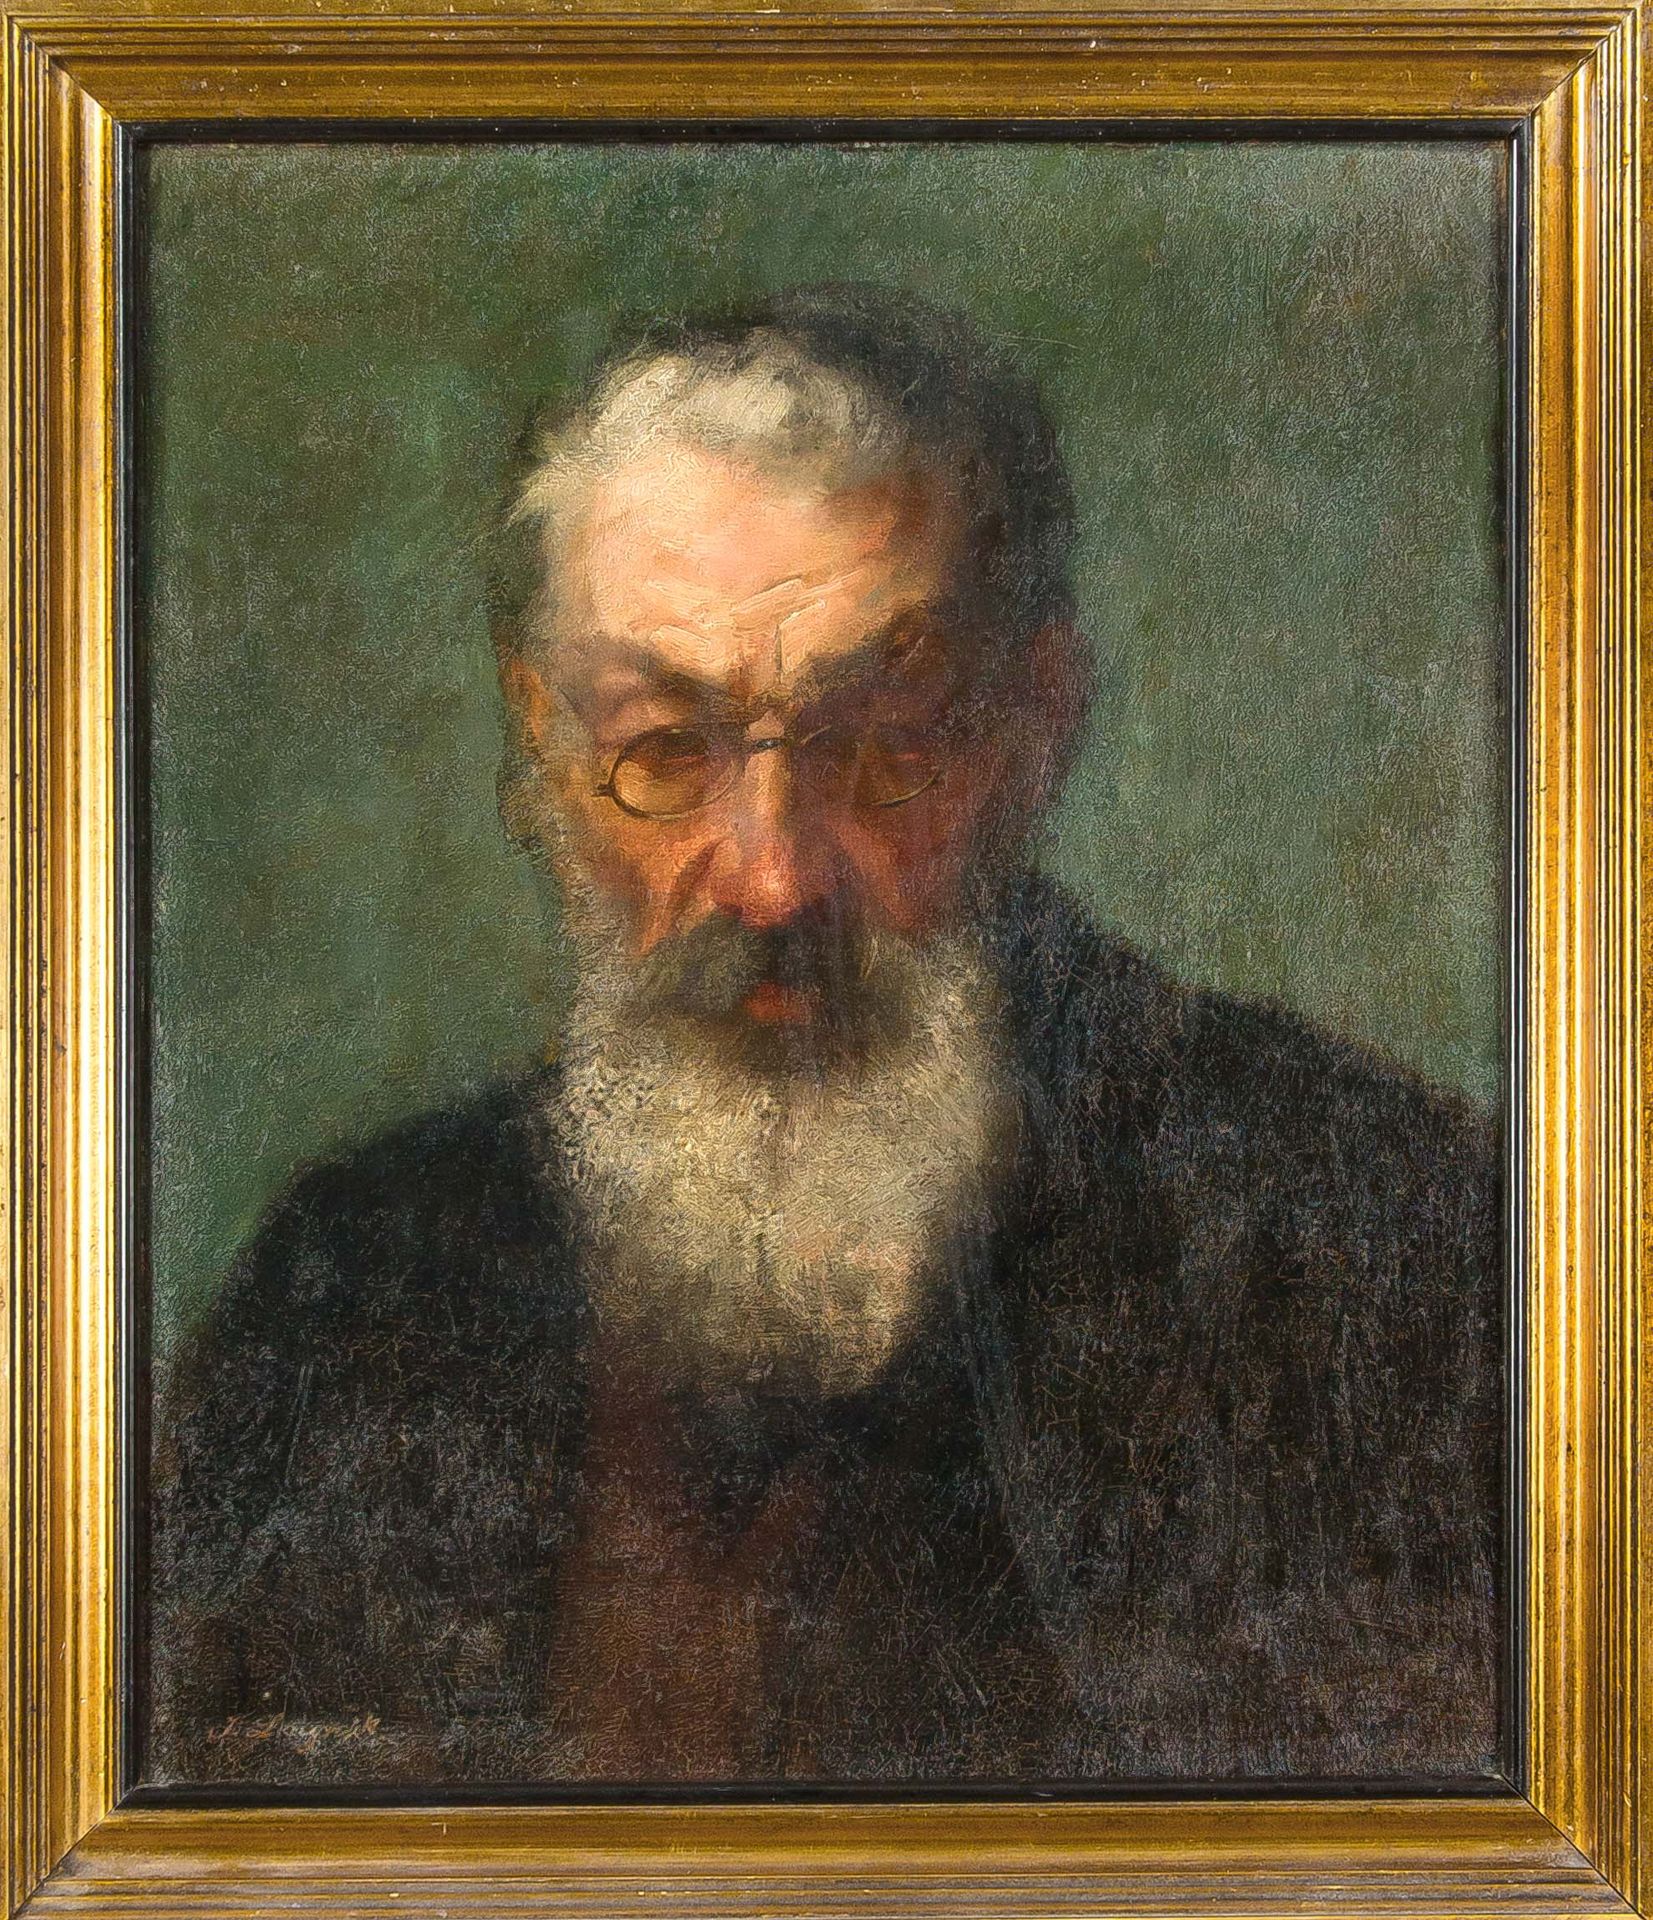 Null J. Lengnick, portrait painter c. 1900, portrait of a rabbi with kippa and g&hellip;